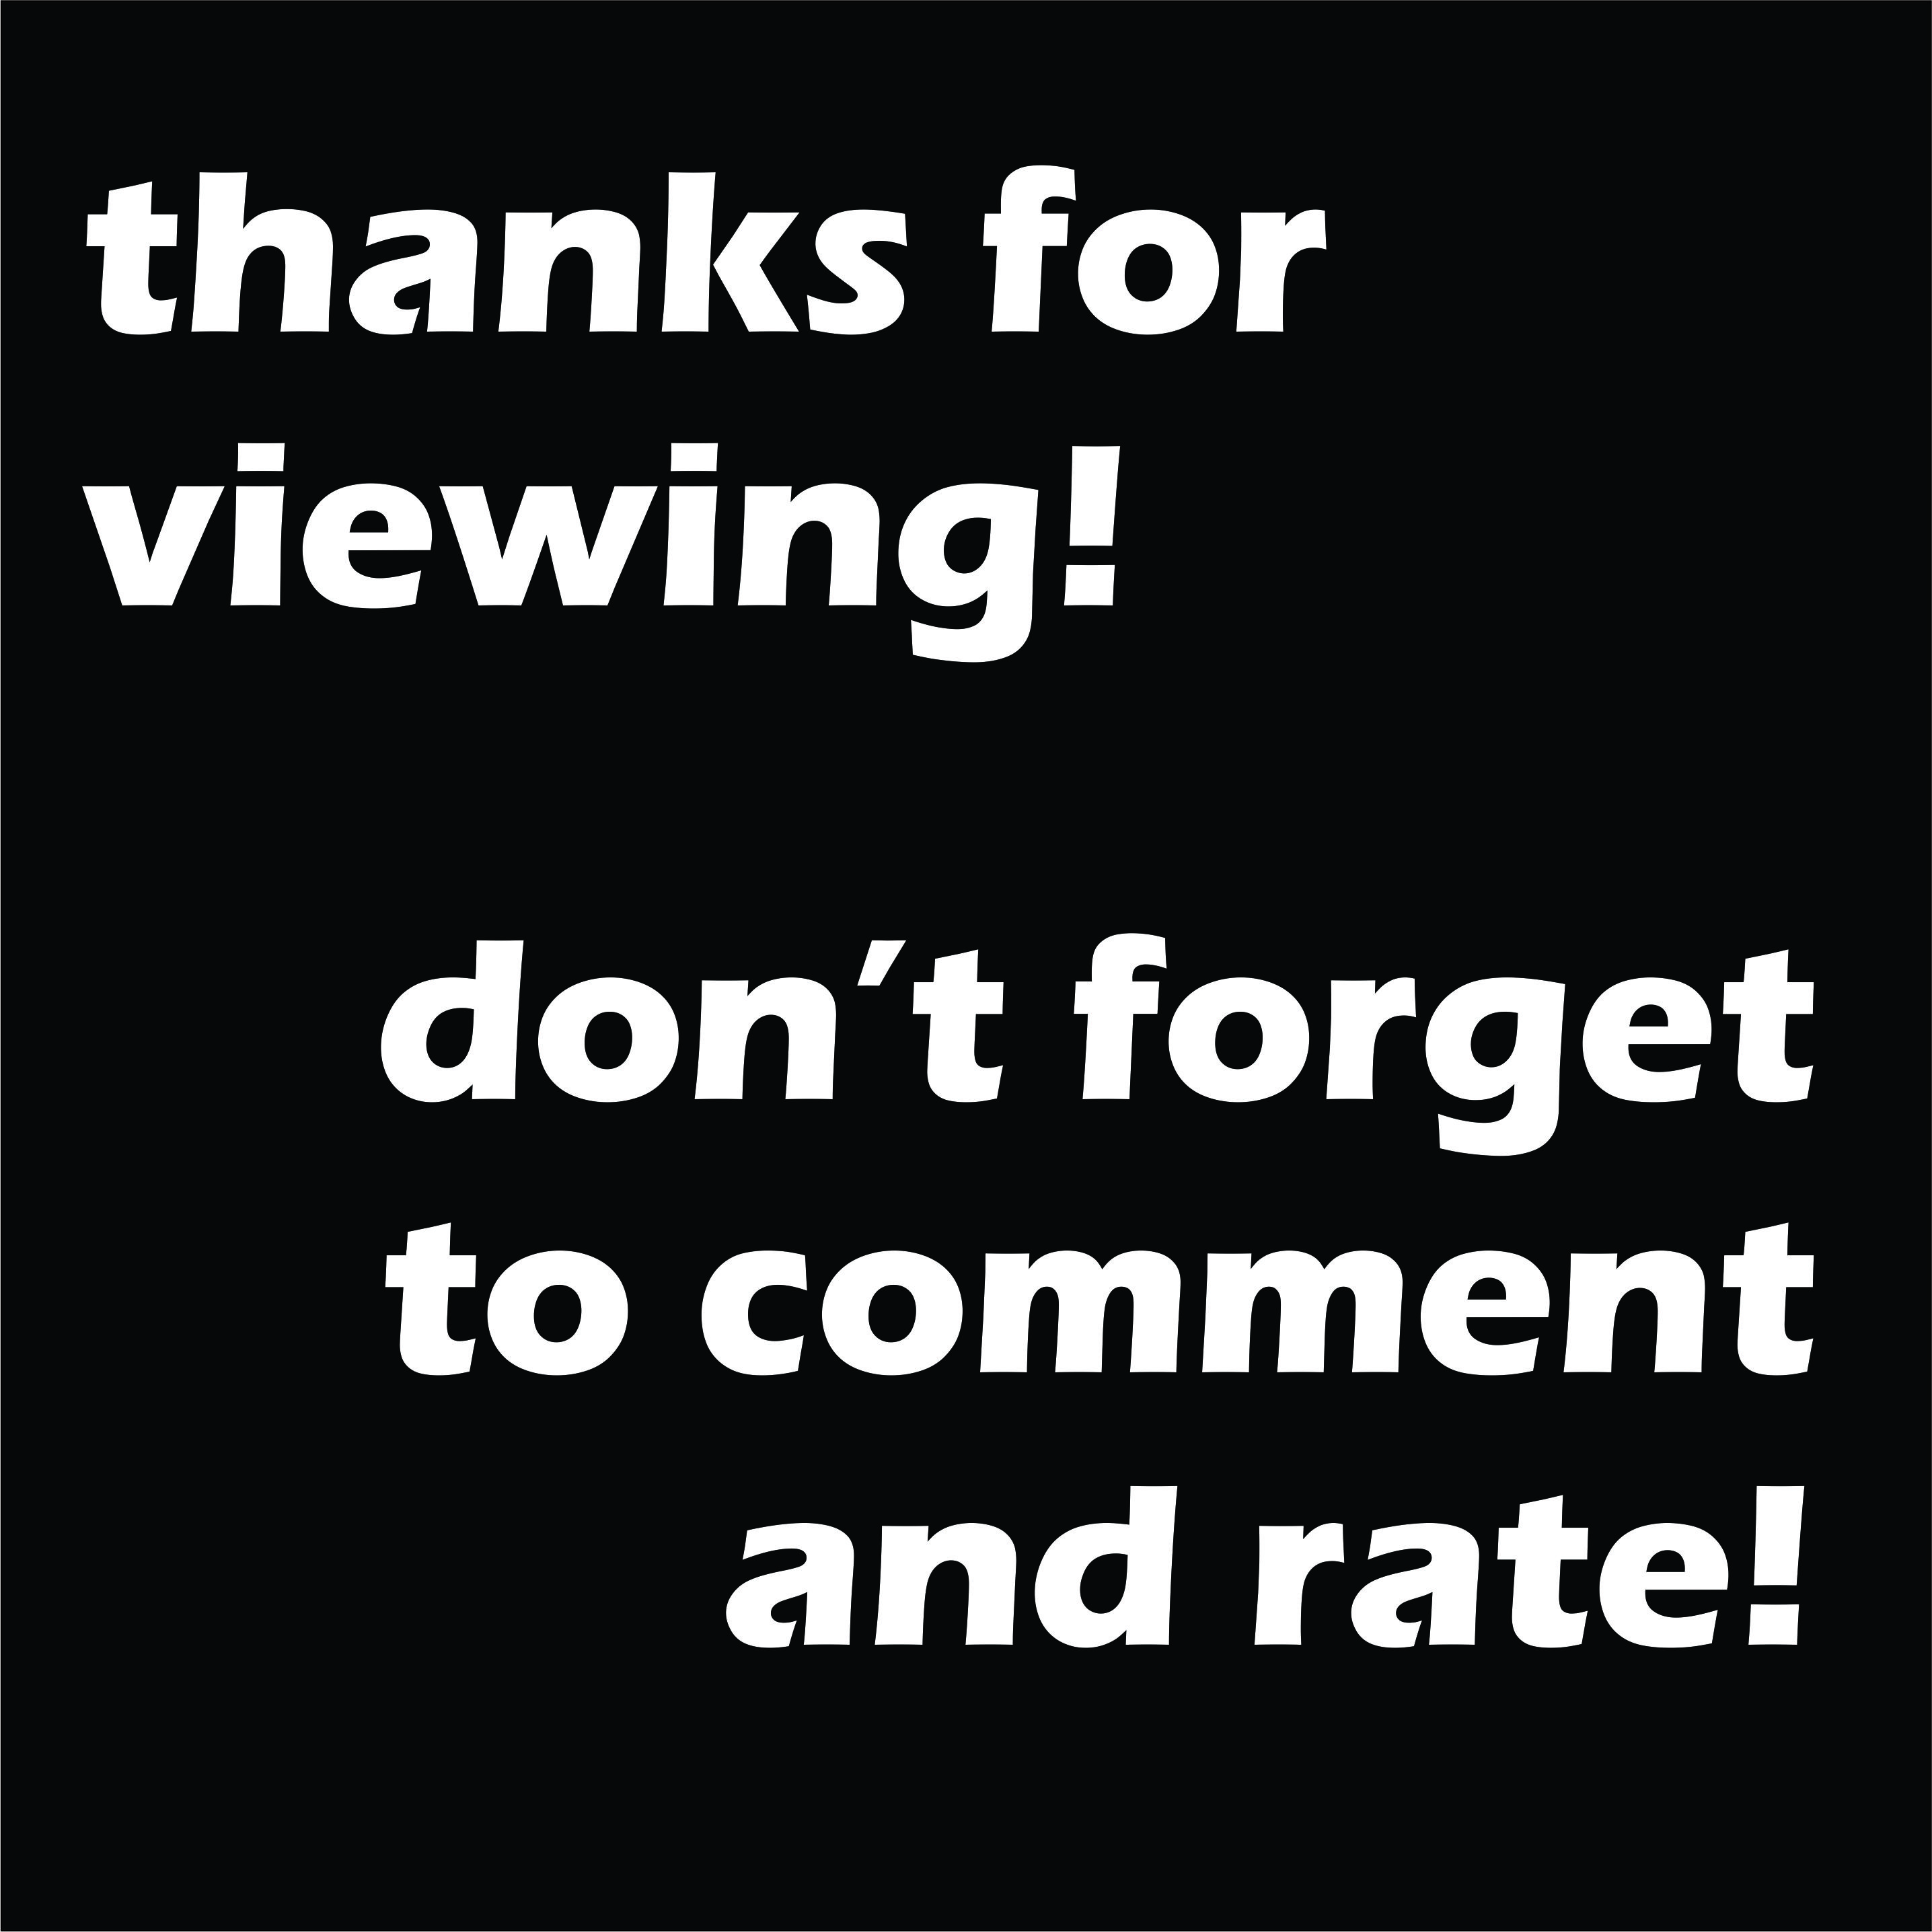 Comment, rate! Check out my blogs!